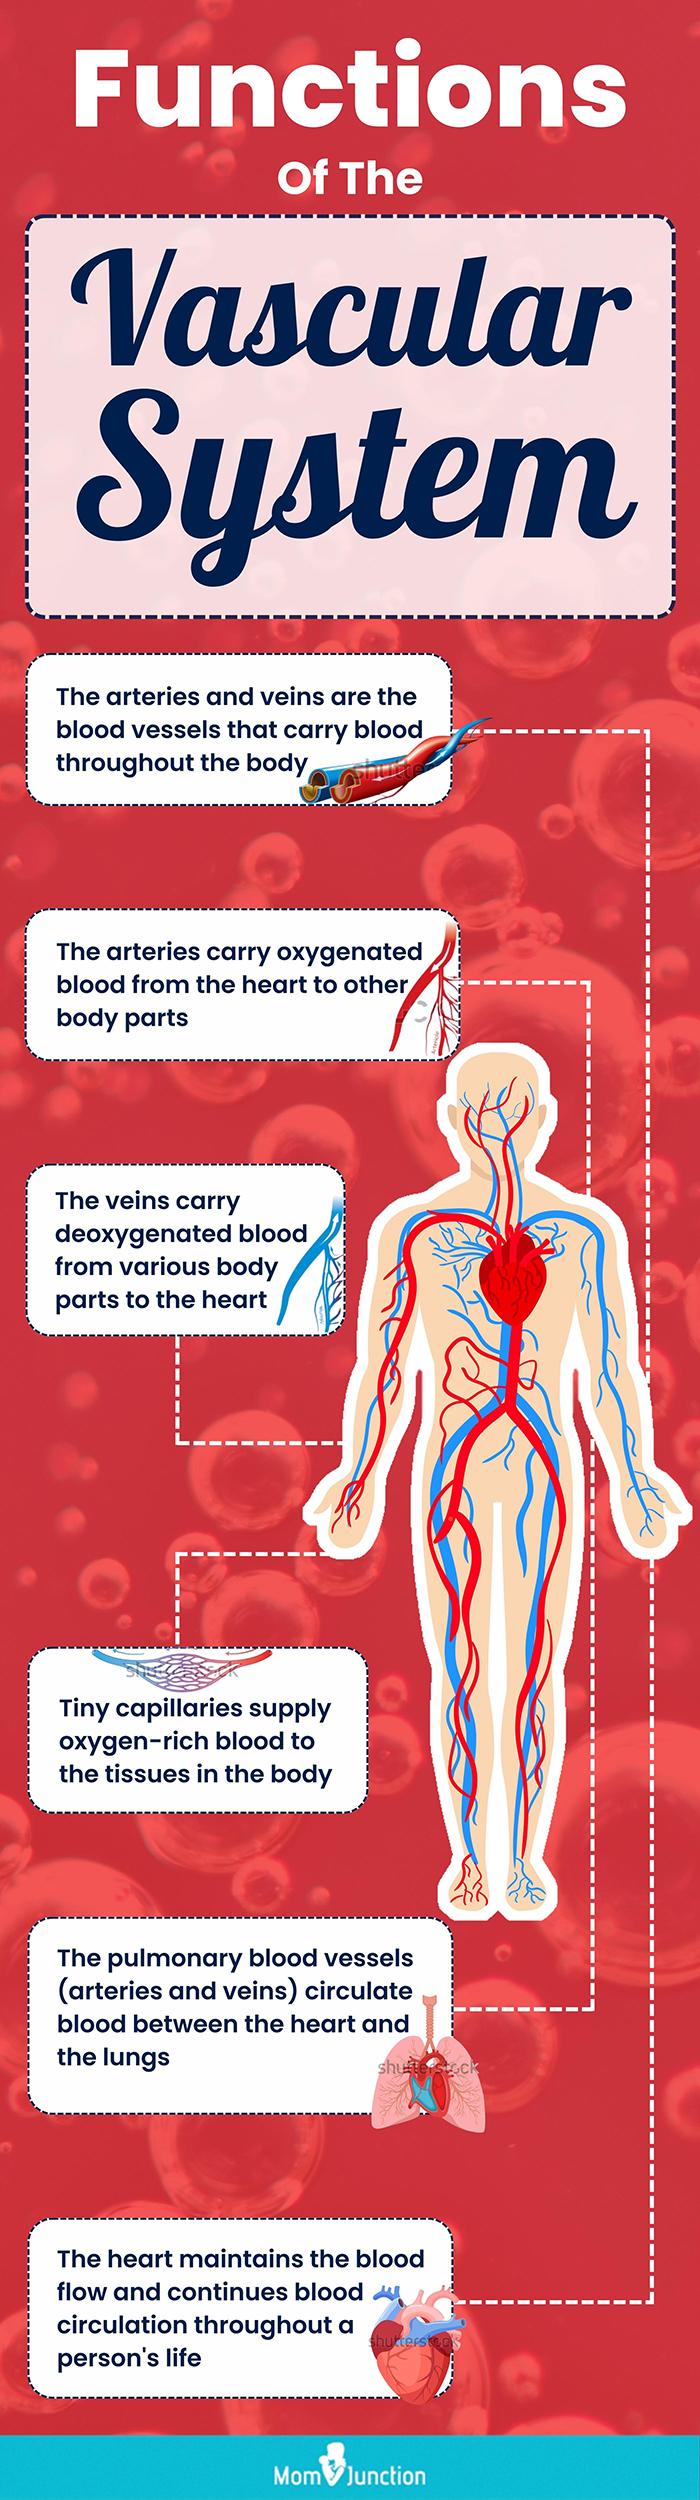 functions of the vascular system [infographic]